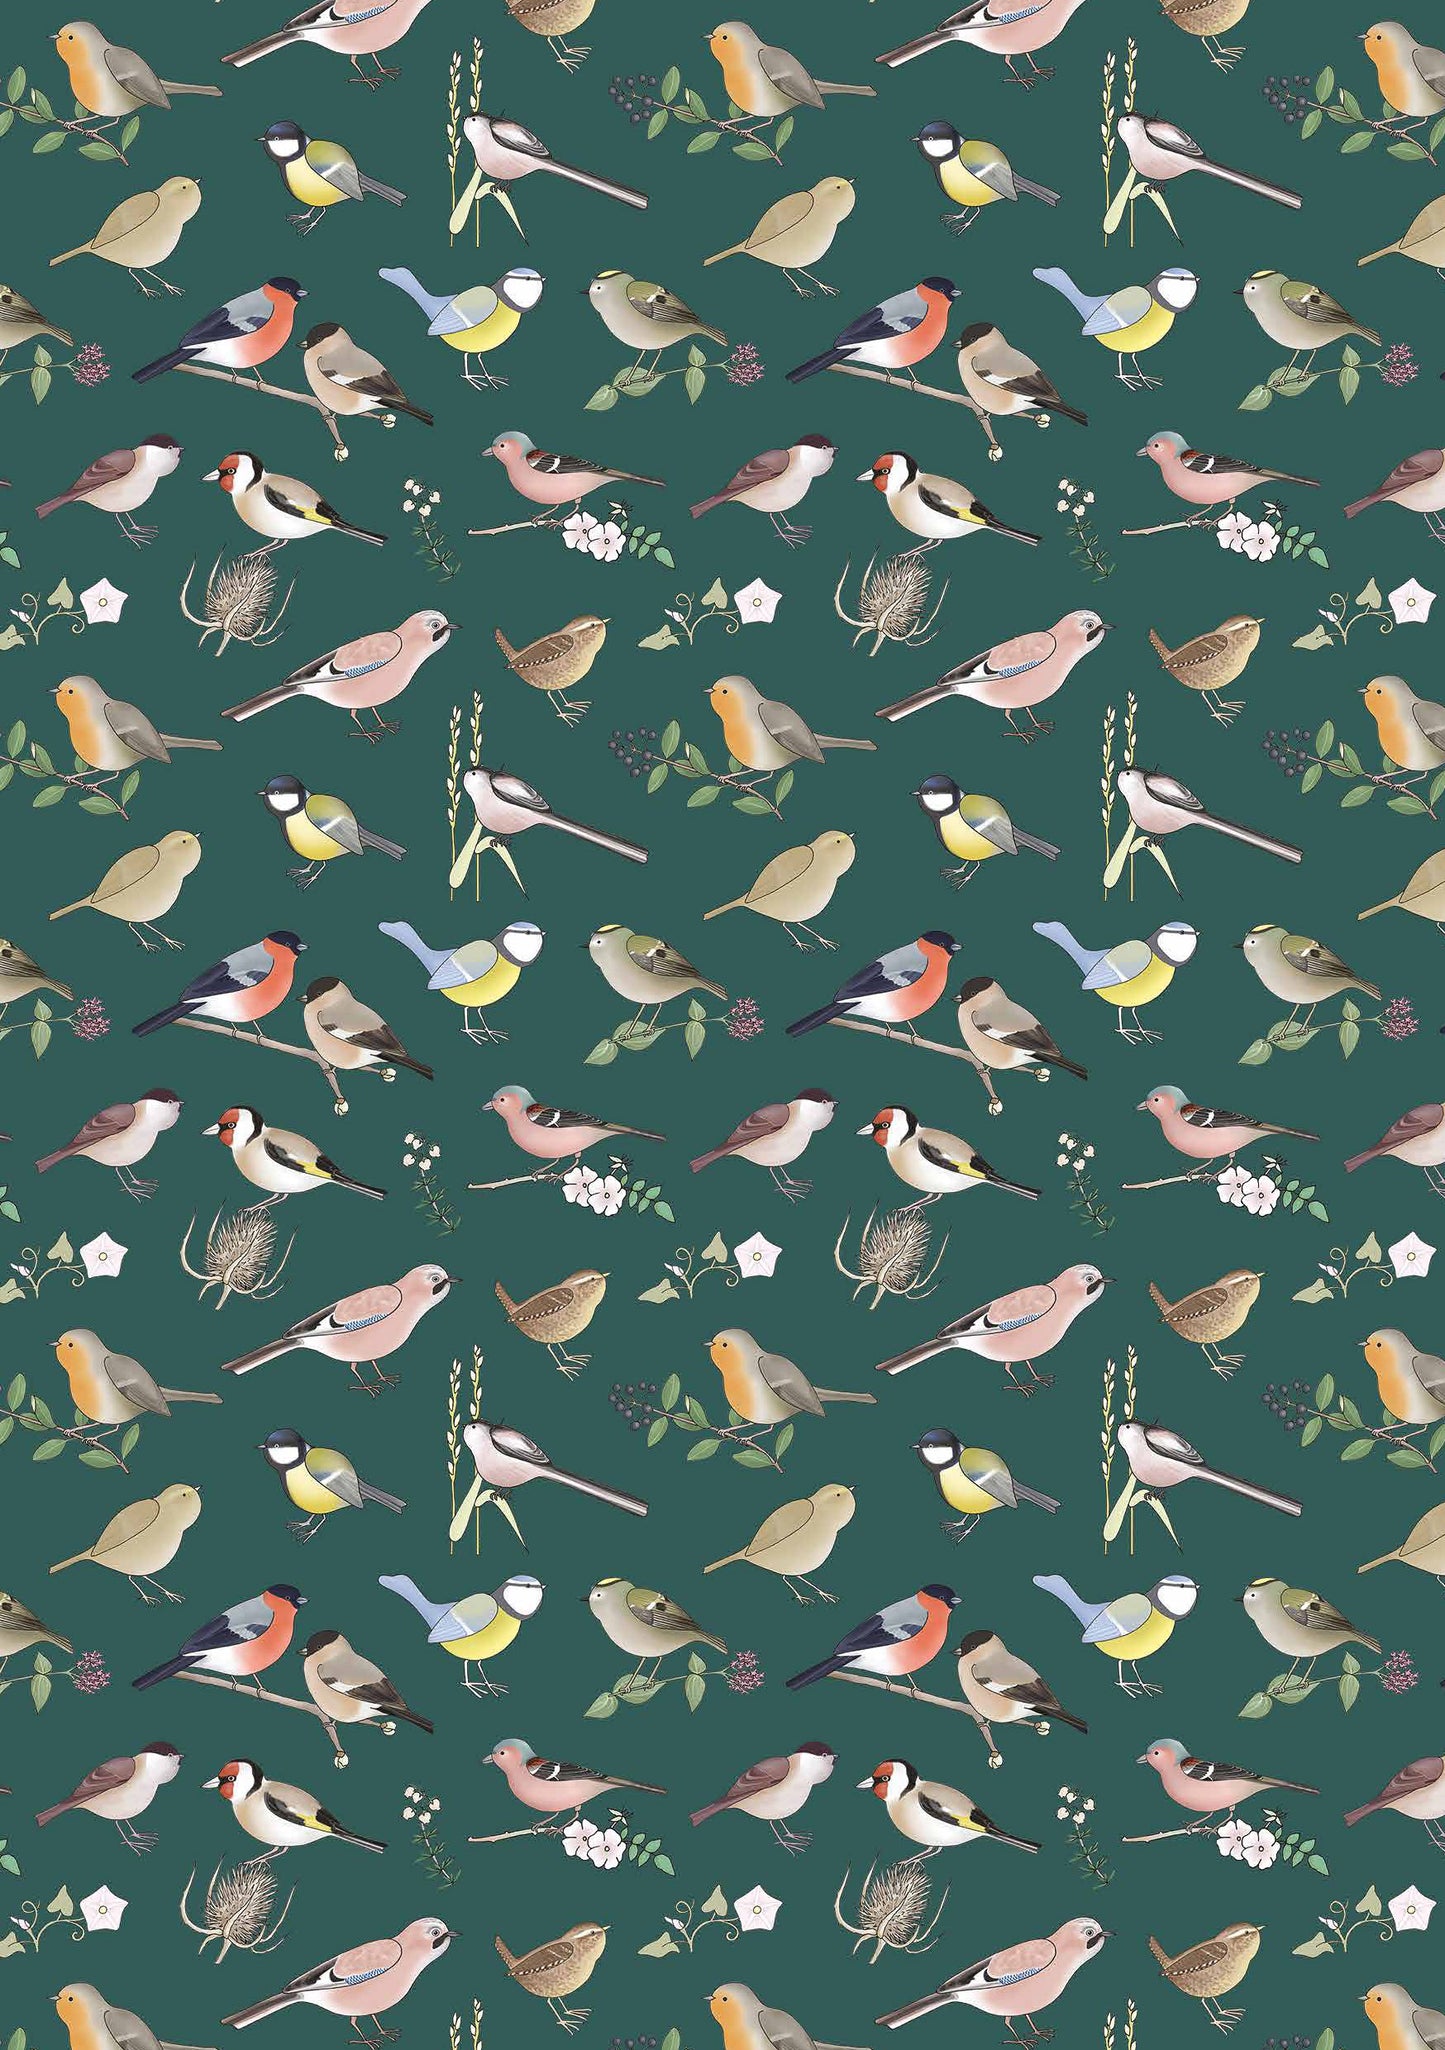 British Birds by Emma Lawrence A5 Notebook